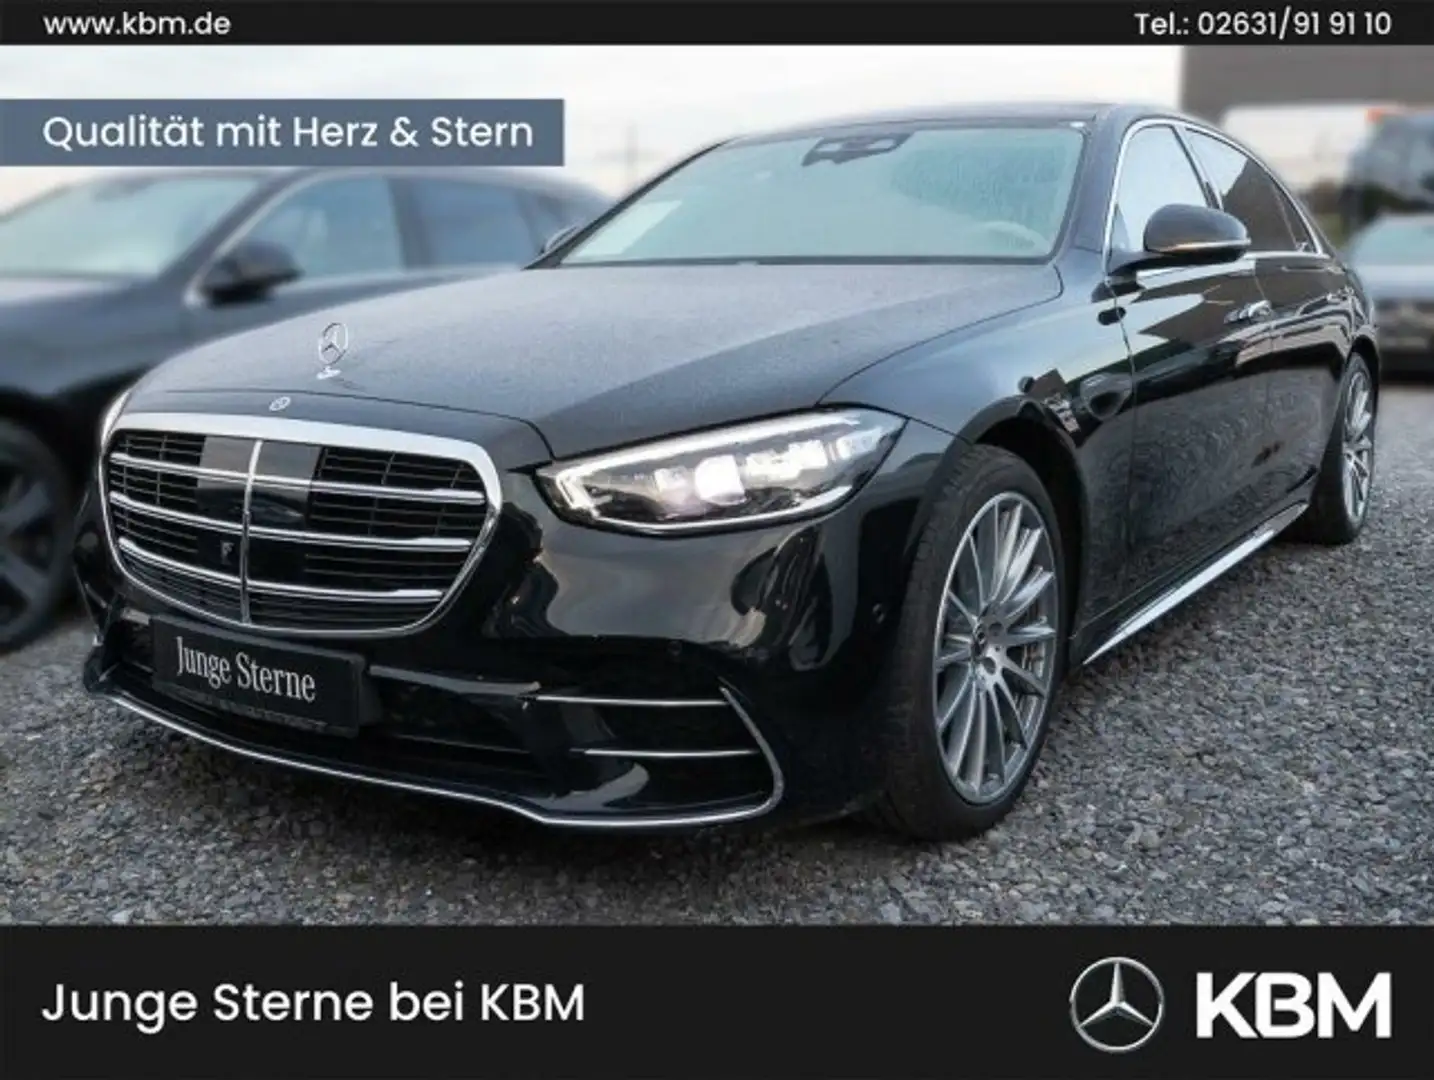 Mercedes-Benz S 450 S 450 4M LANG AMG°PANO°SITZKLIMAx4°360°CHAUFFEUR crna - 1